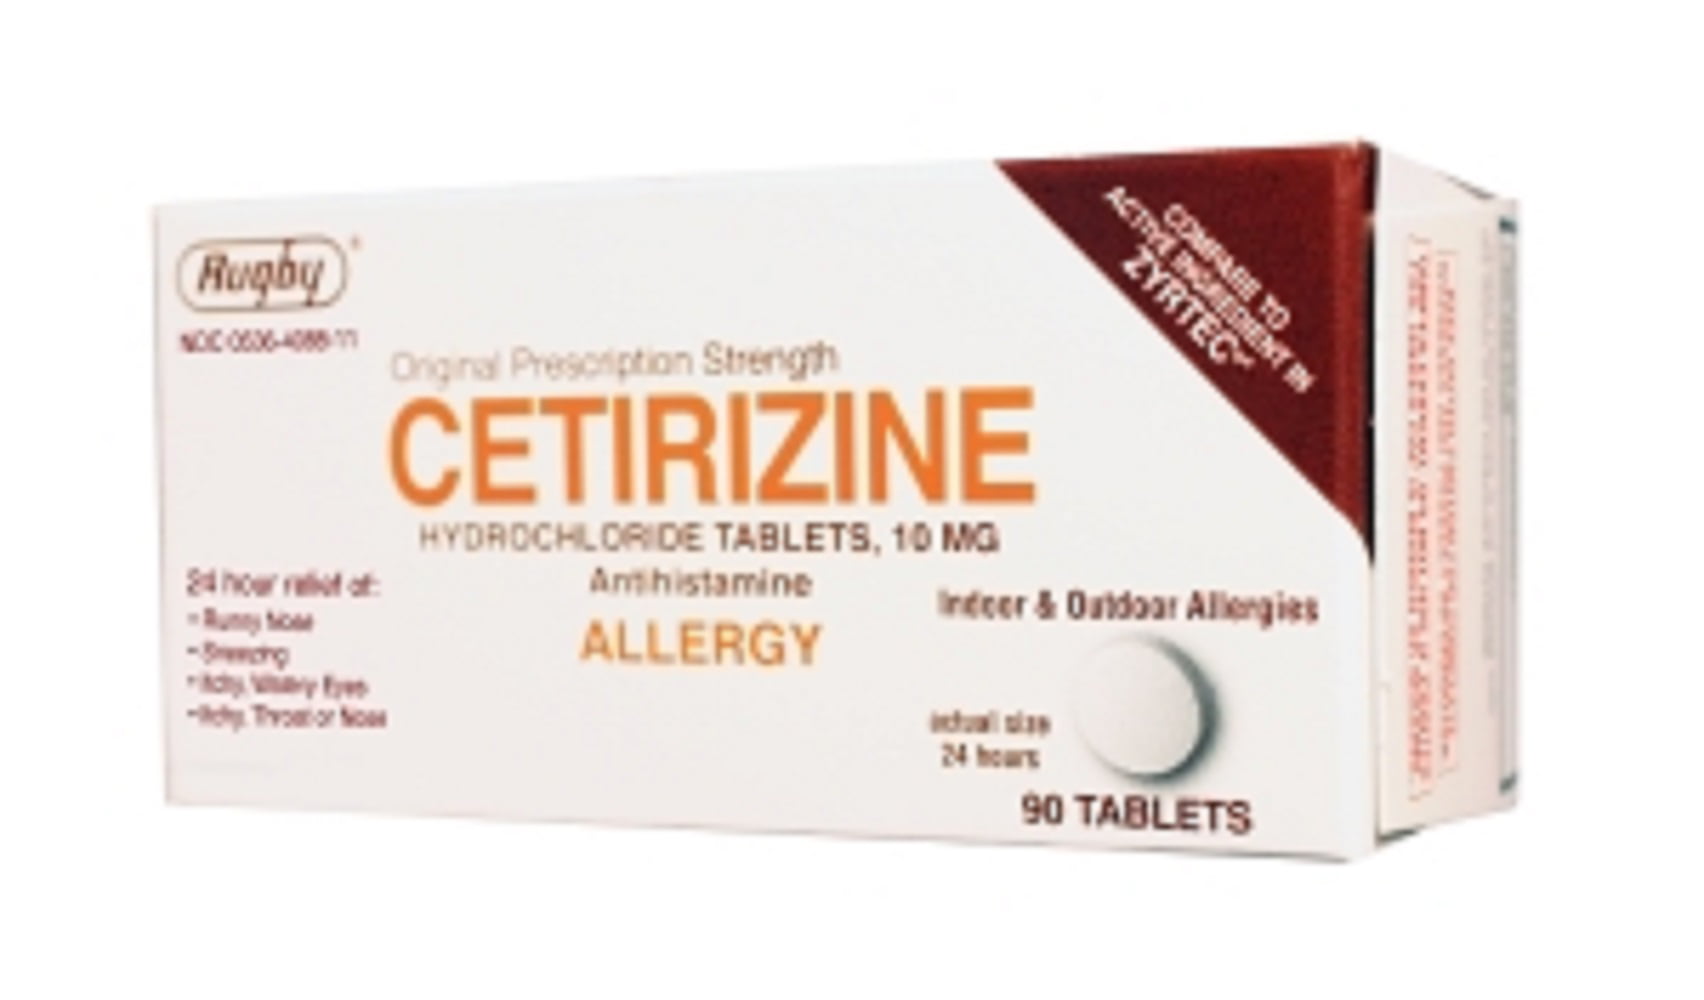 Rugby Cetirizine Hydrochloride Tablets 10 Mg 90 Count